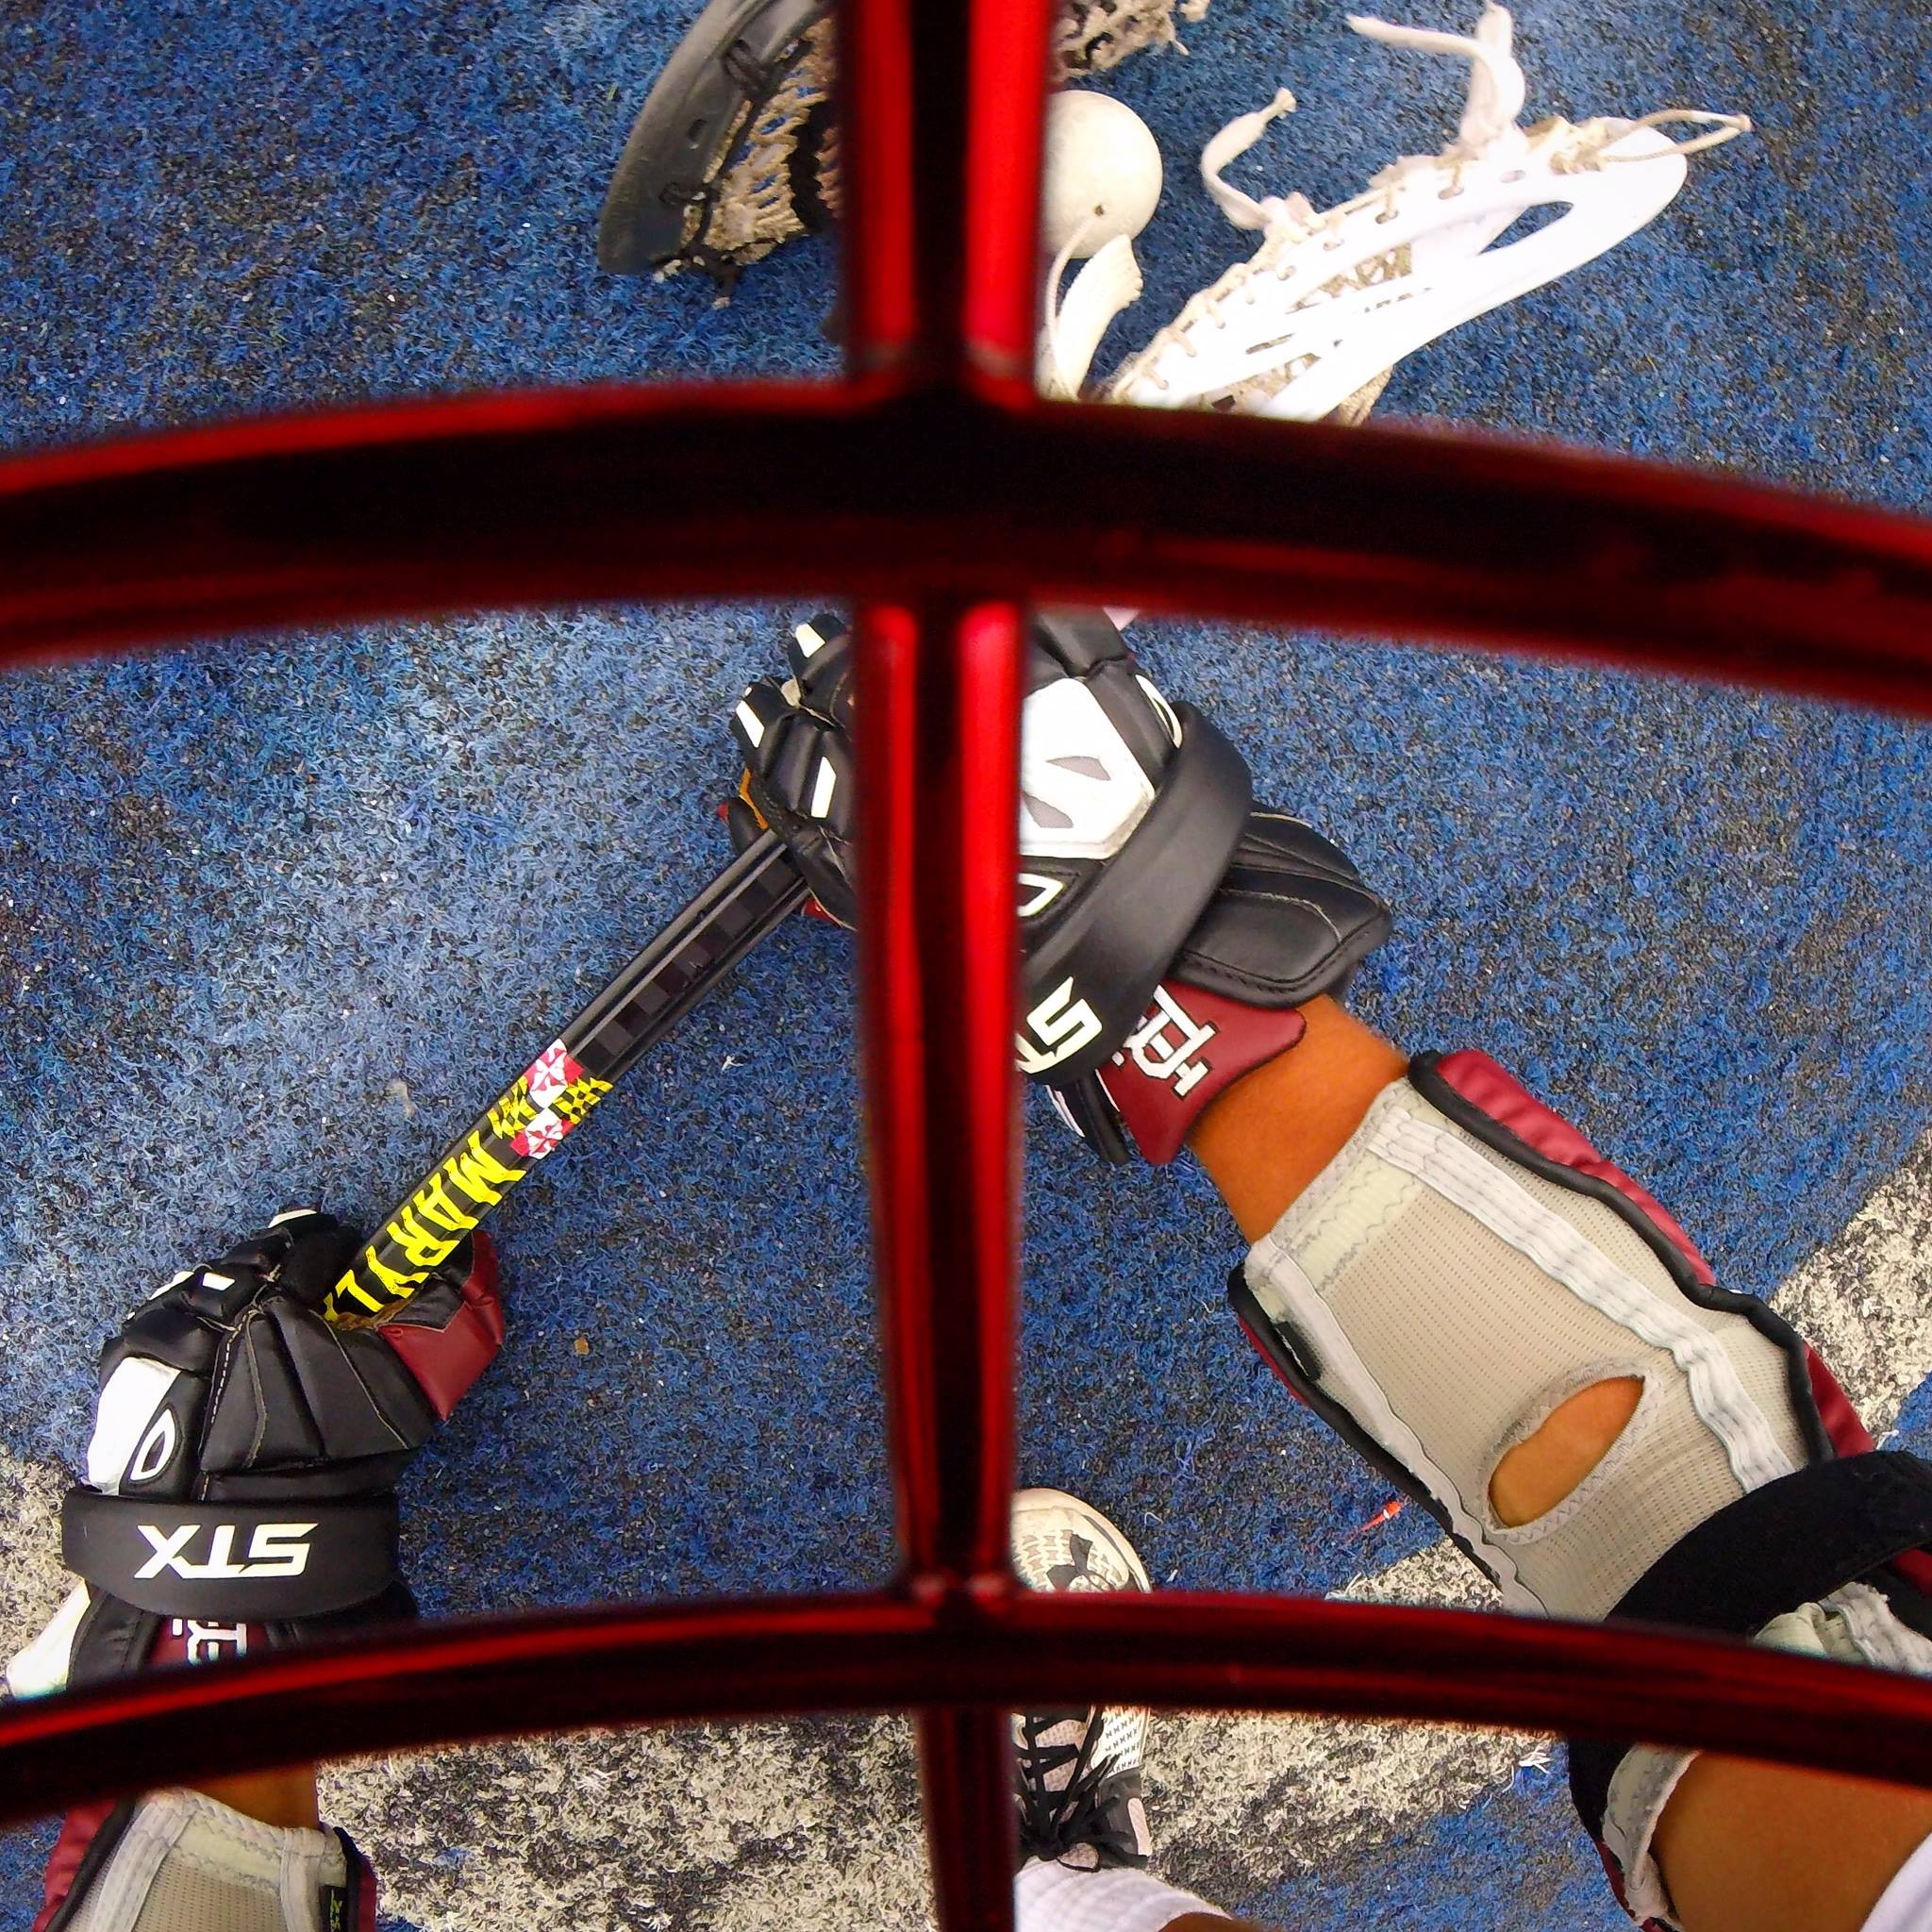 Go “Behind the Shot” of our GoPro #BestOf2015 Finalists